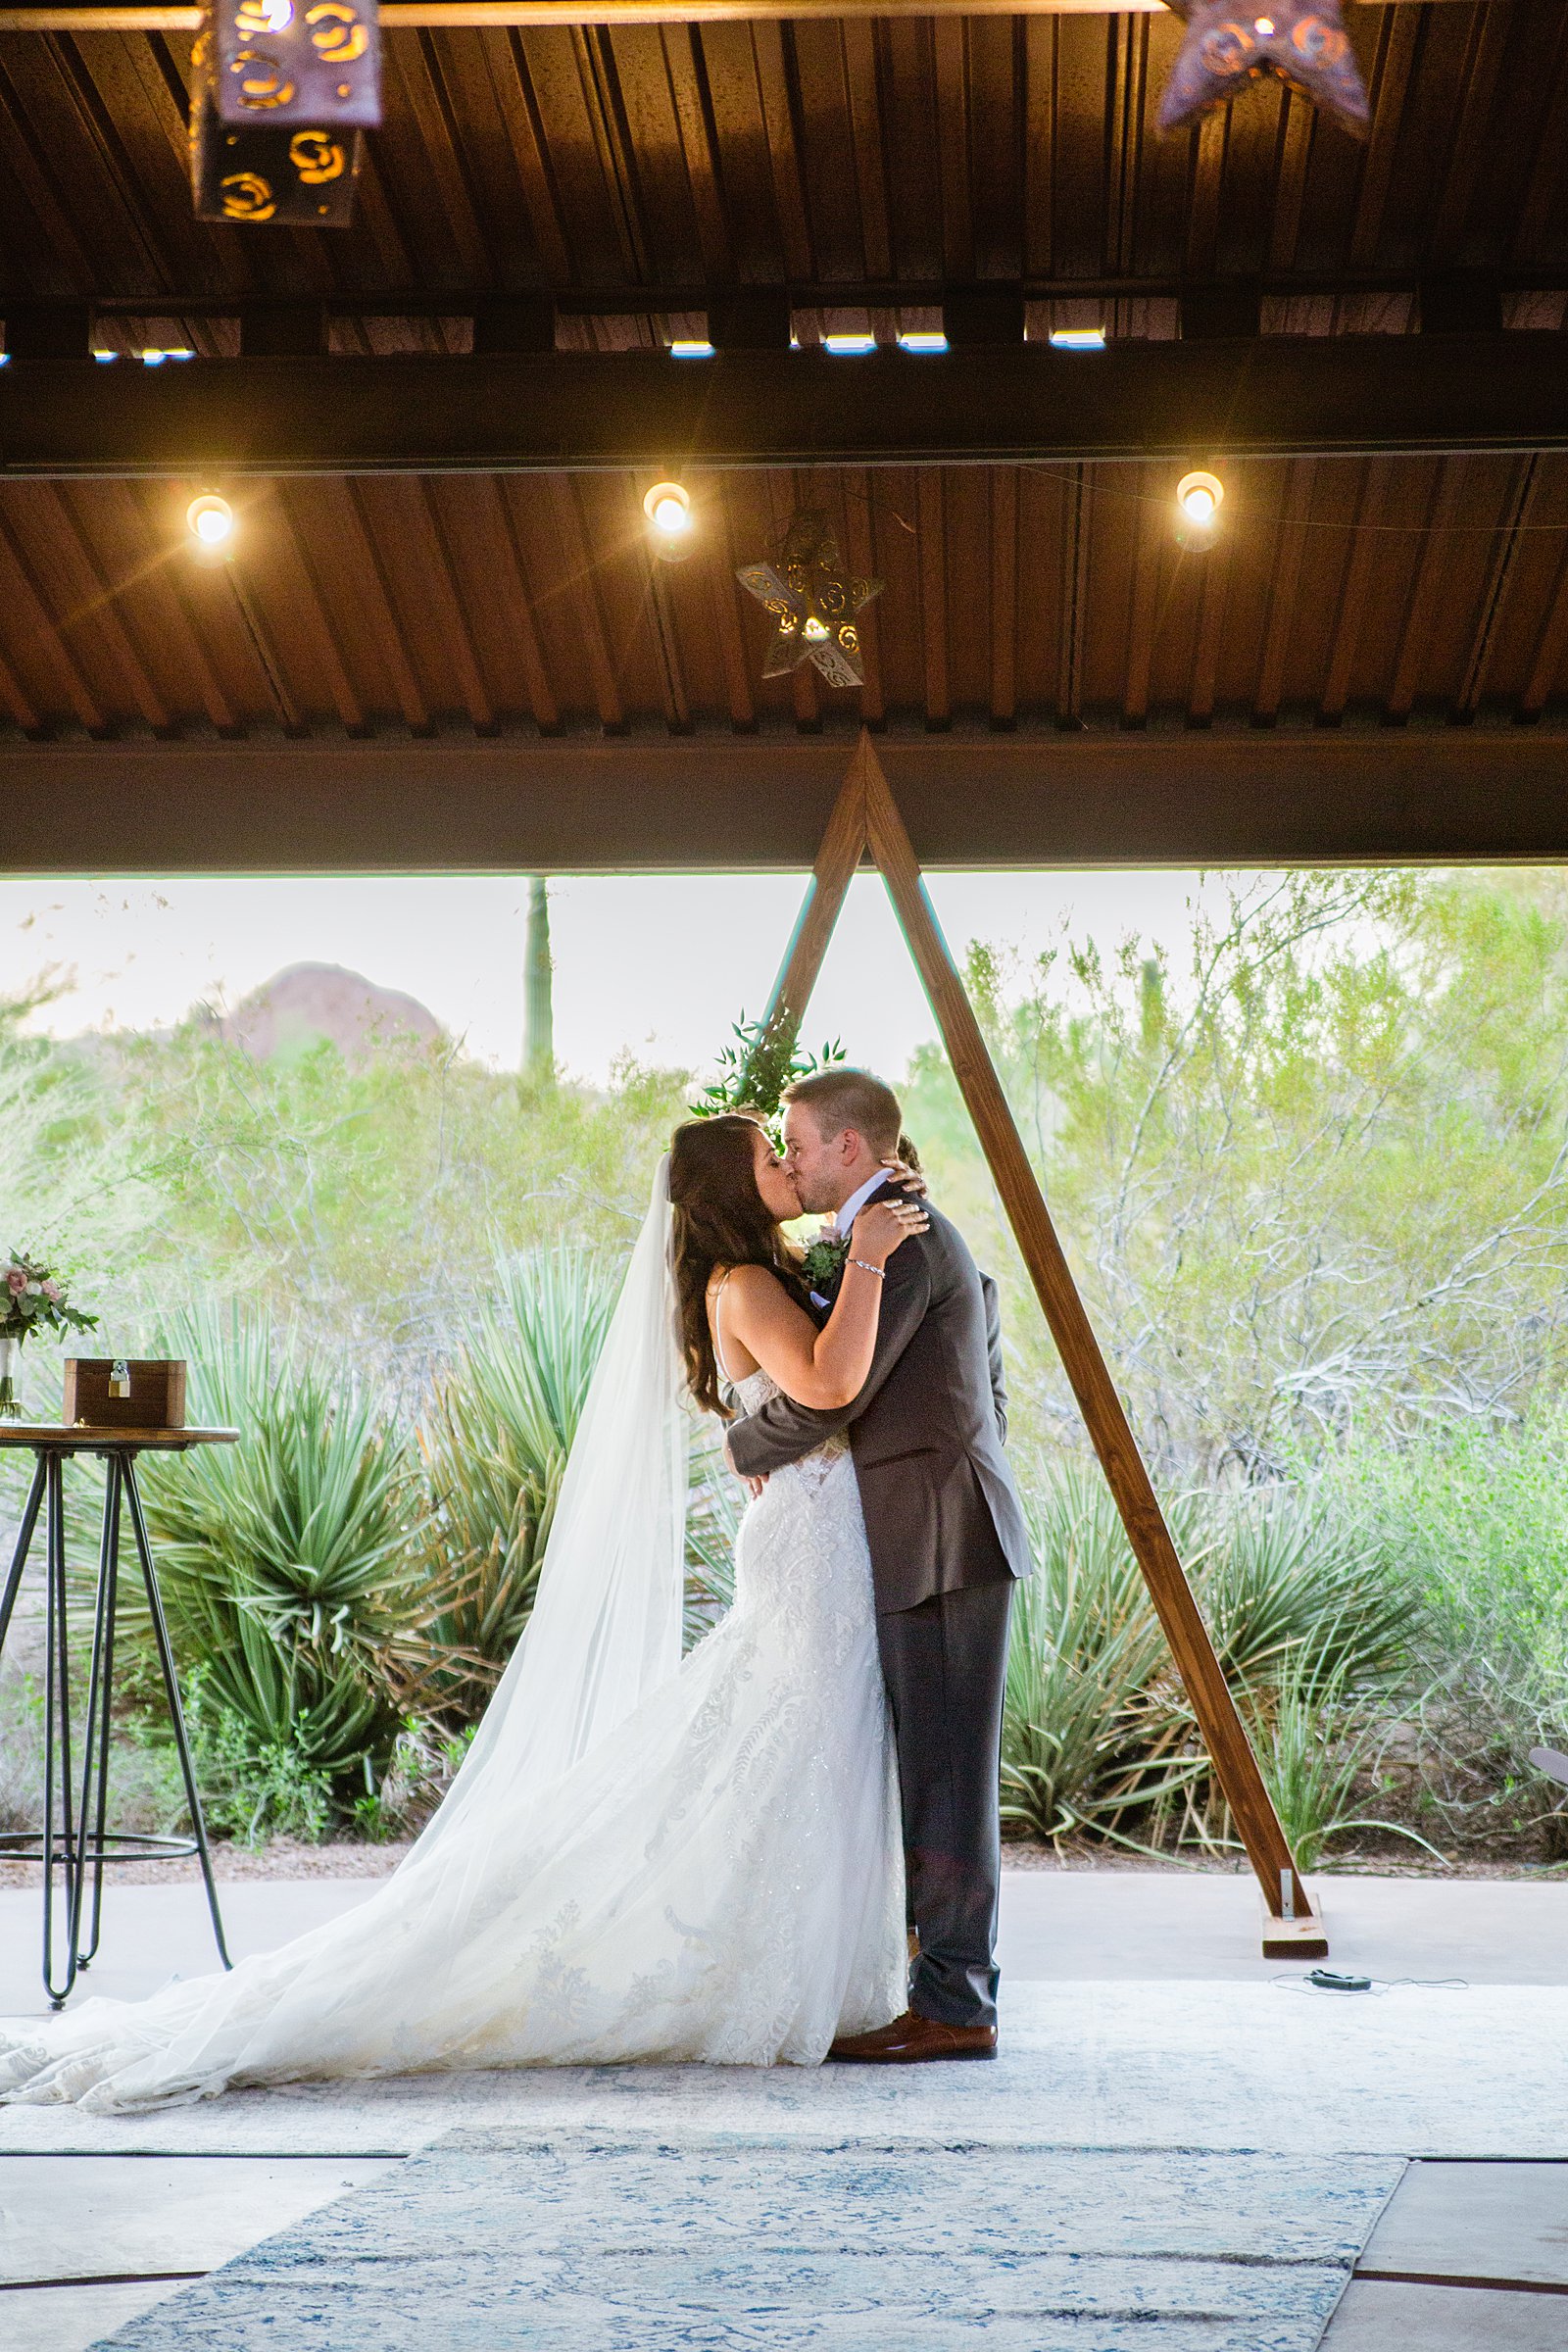 Bride and Groom share their first kiss during their wedding ceremony at Desert Botanical Gardens by Arizona wedding photographer PMA Photography.